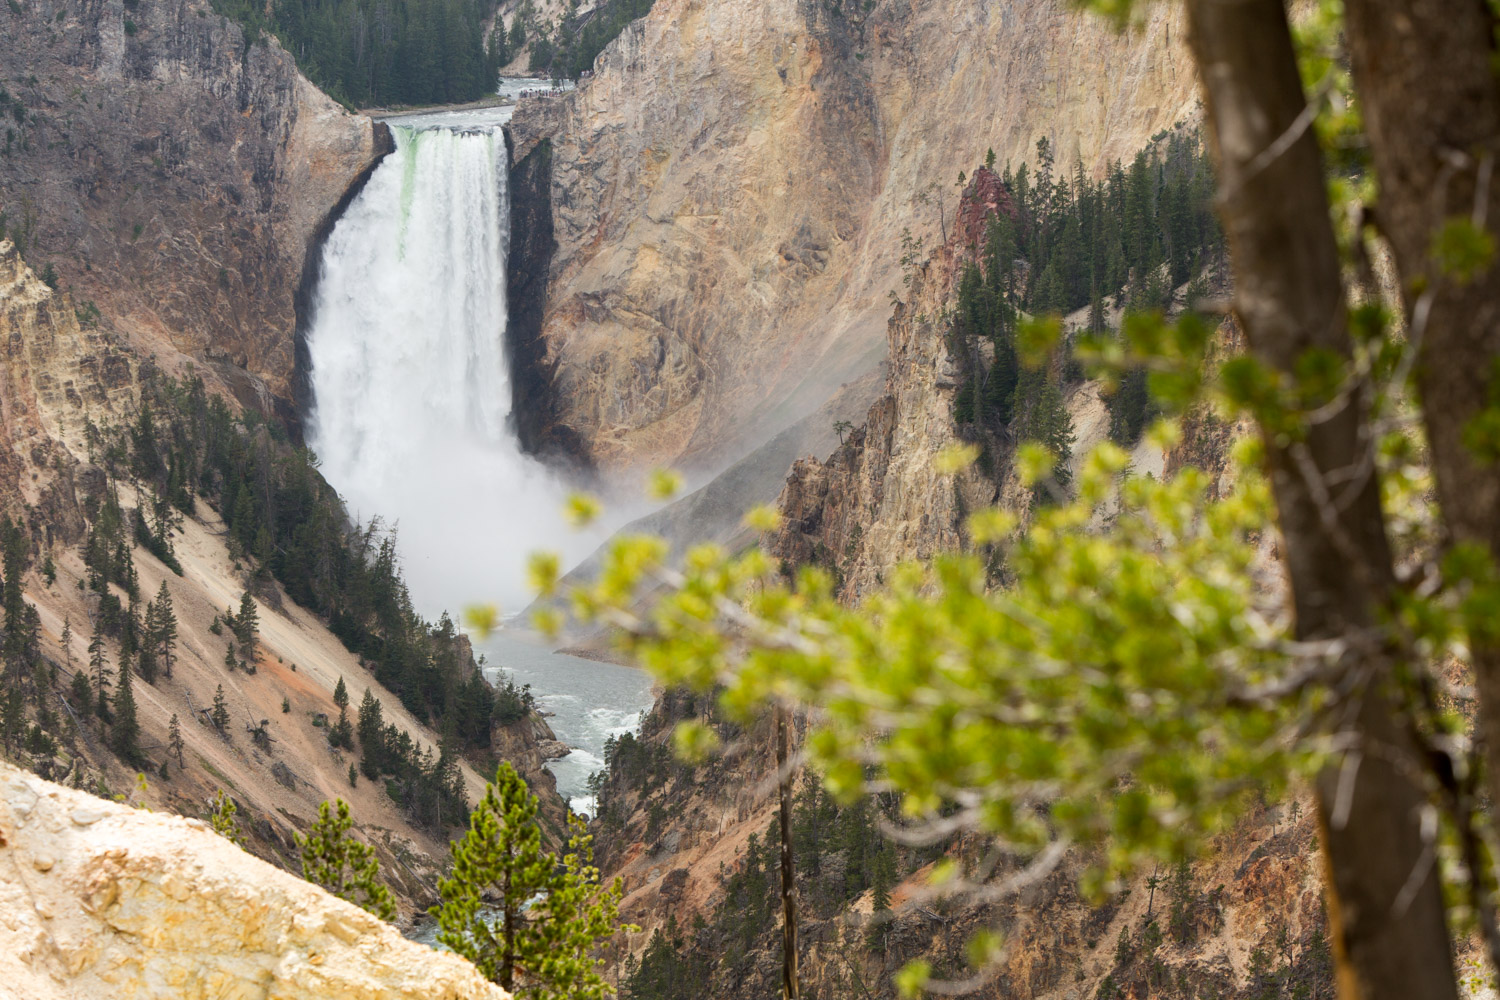 Eric Kruszewski photographs a Yellowstone waterfall for National Geographic Expeditions.